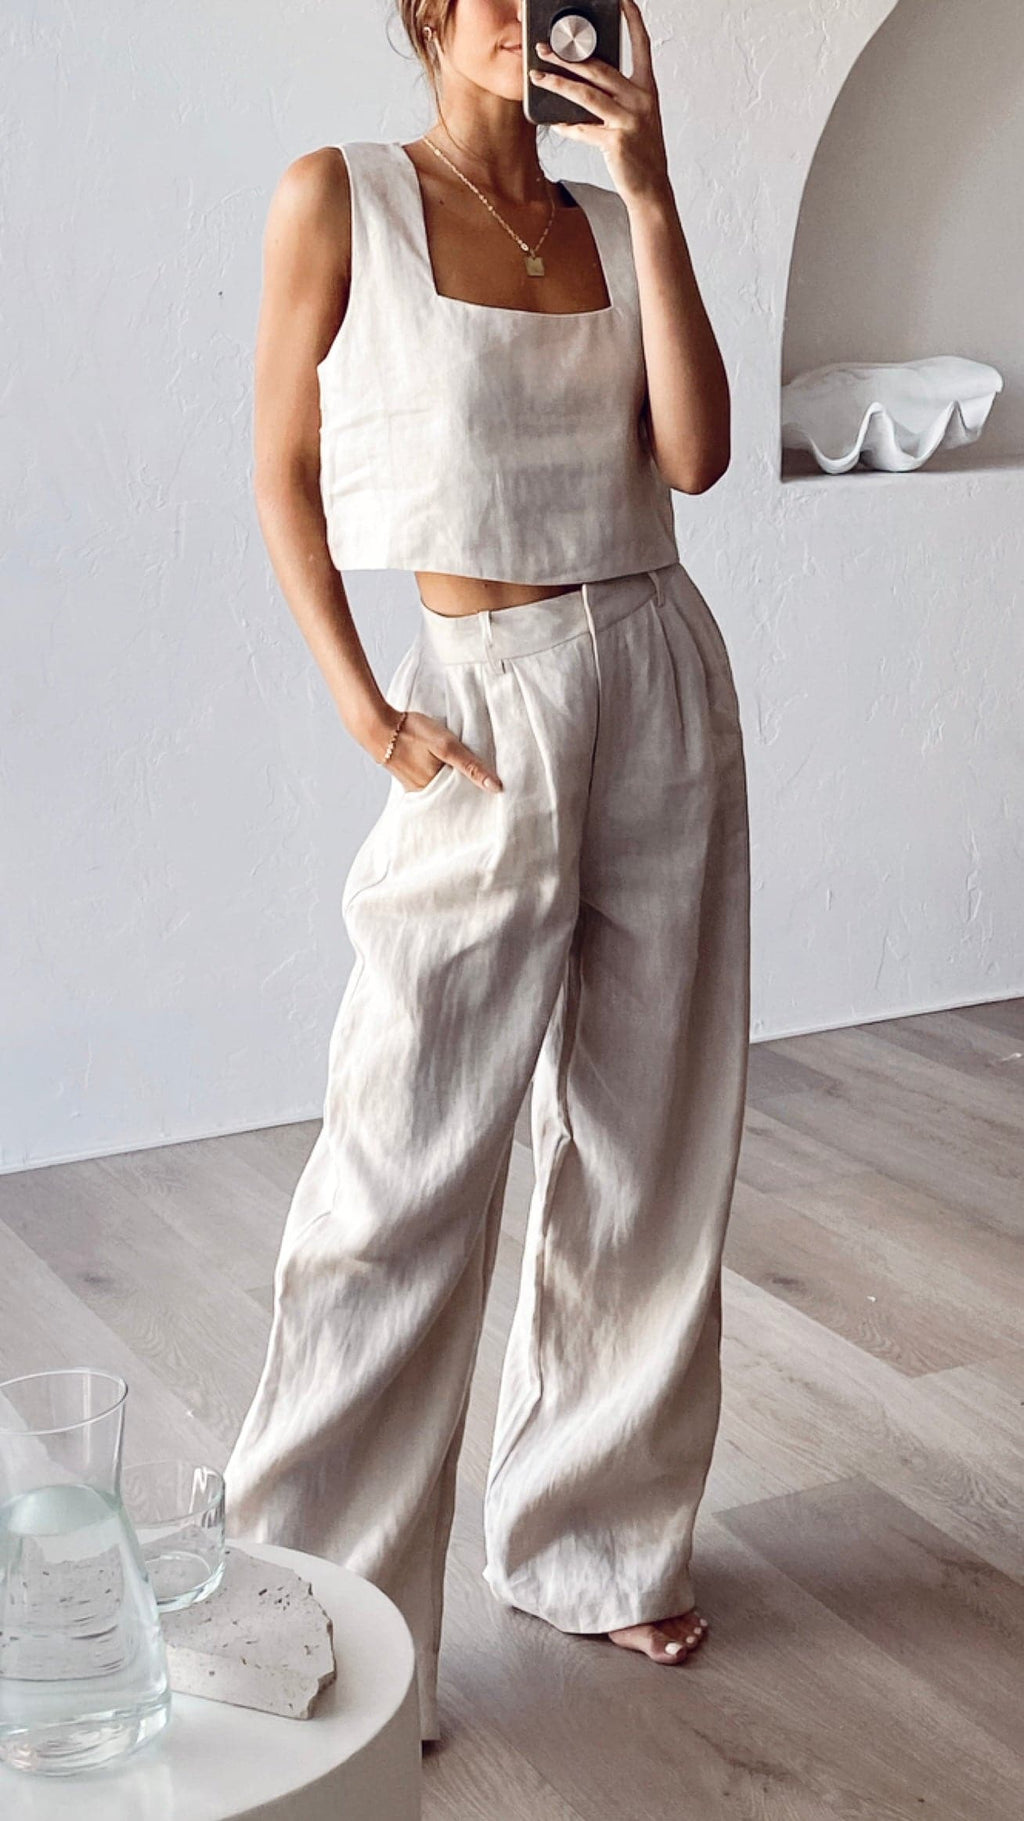 Salvador Two Piece Set - Linen Look Sleeveless Crop Top and High Waisted  Tailored Shorts in Oatmeal